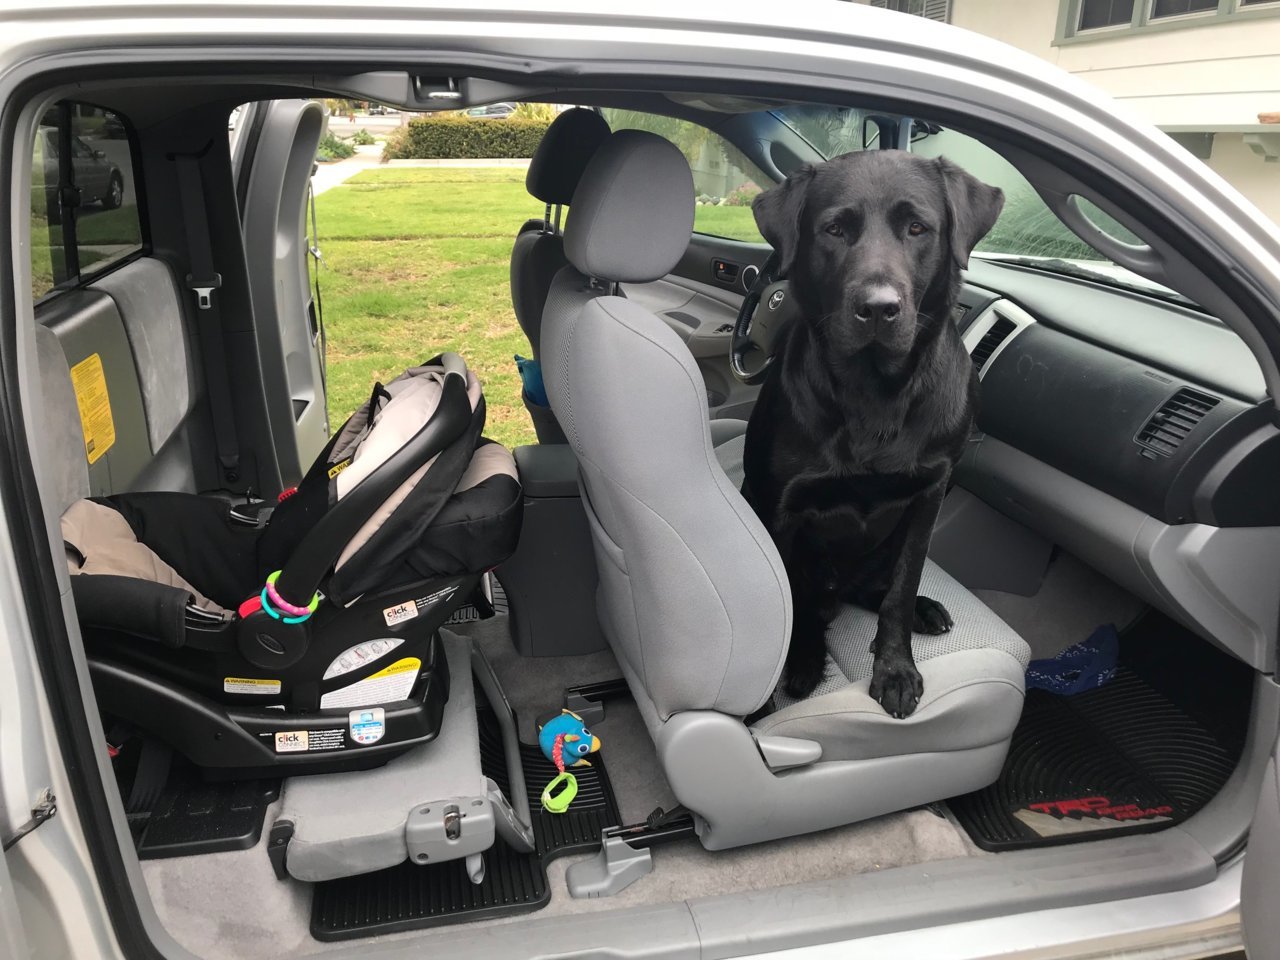 Rear Facing Car Seat In Access Cab, How To Install Car Seat In Extended Cab Truck